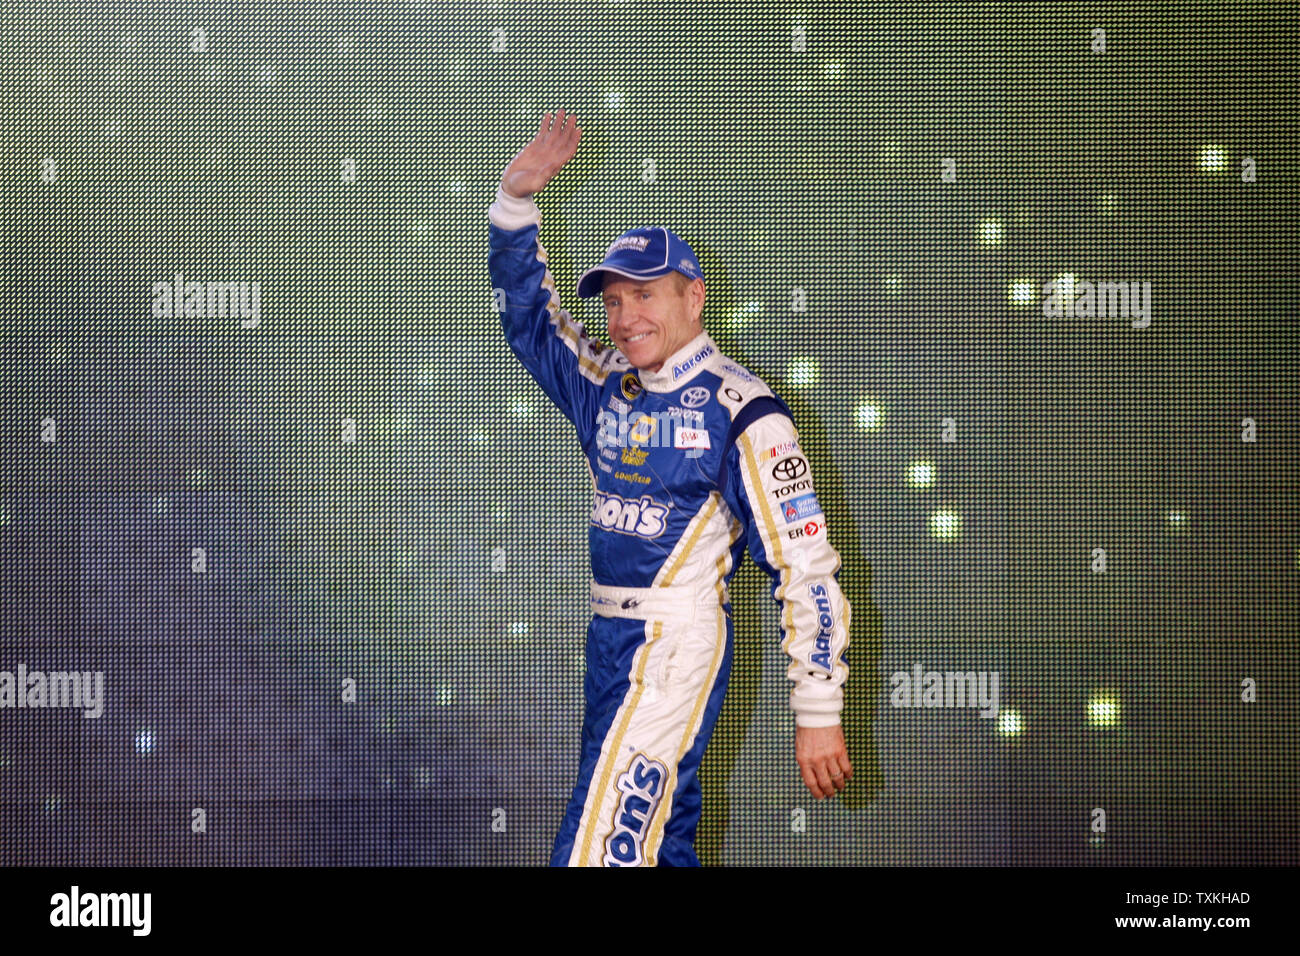 Mark Martin waves to fans during driver introductions at the NASCAR Sprint Cup All-Star Race at the Charlotte Motor Speedway in Concord, North Carolina on May 19, 2012.      UPI/Nell Redmond. Stock Photo